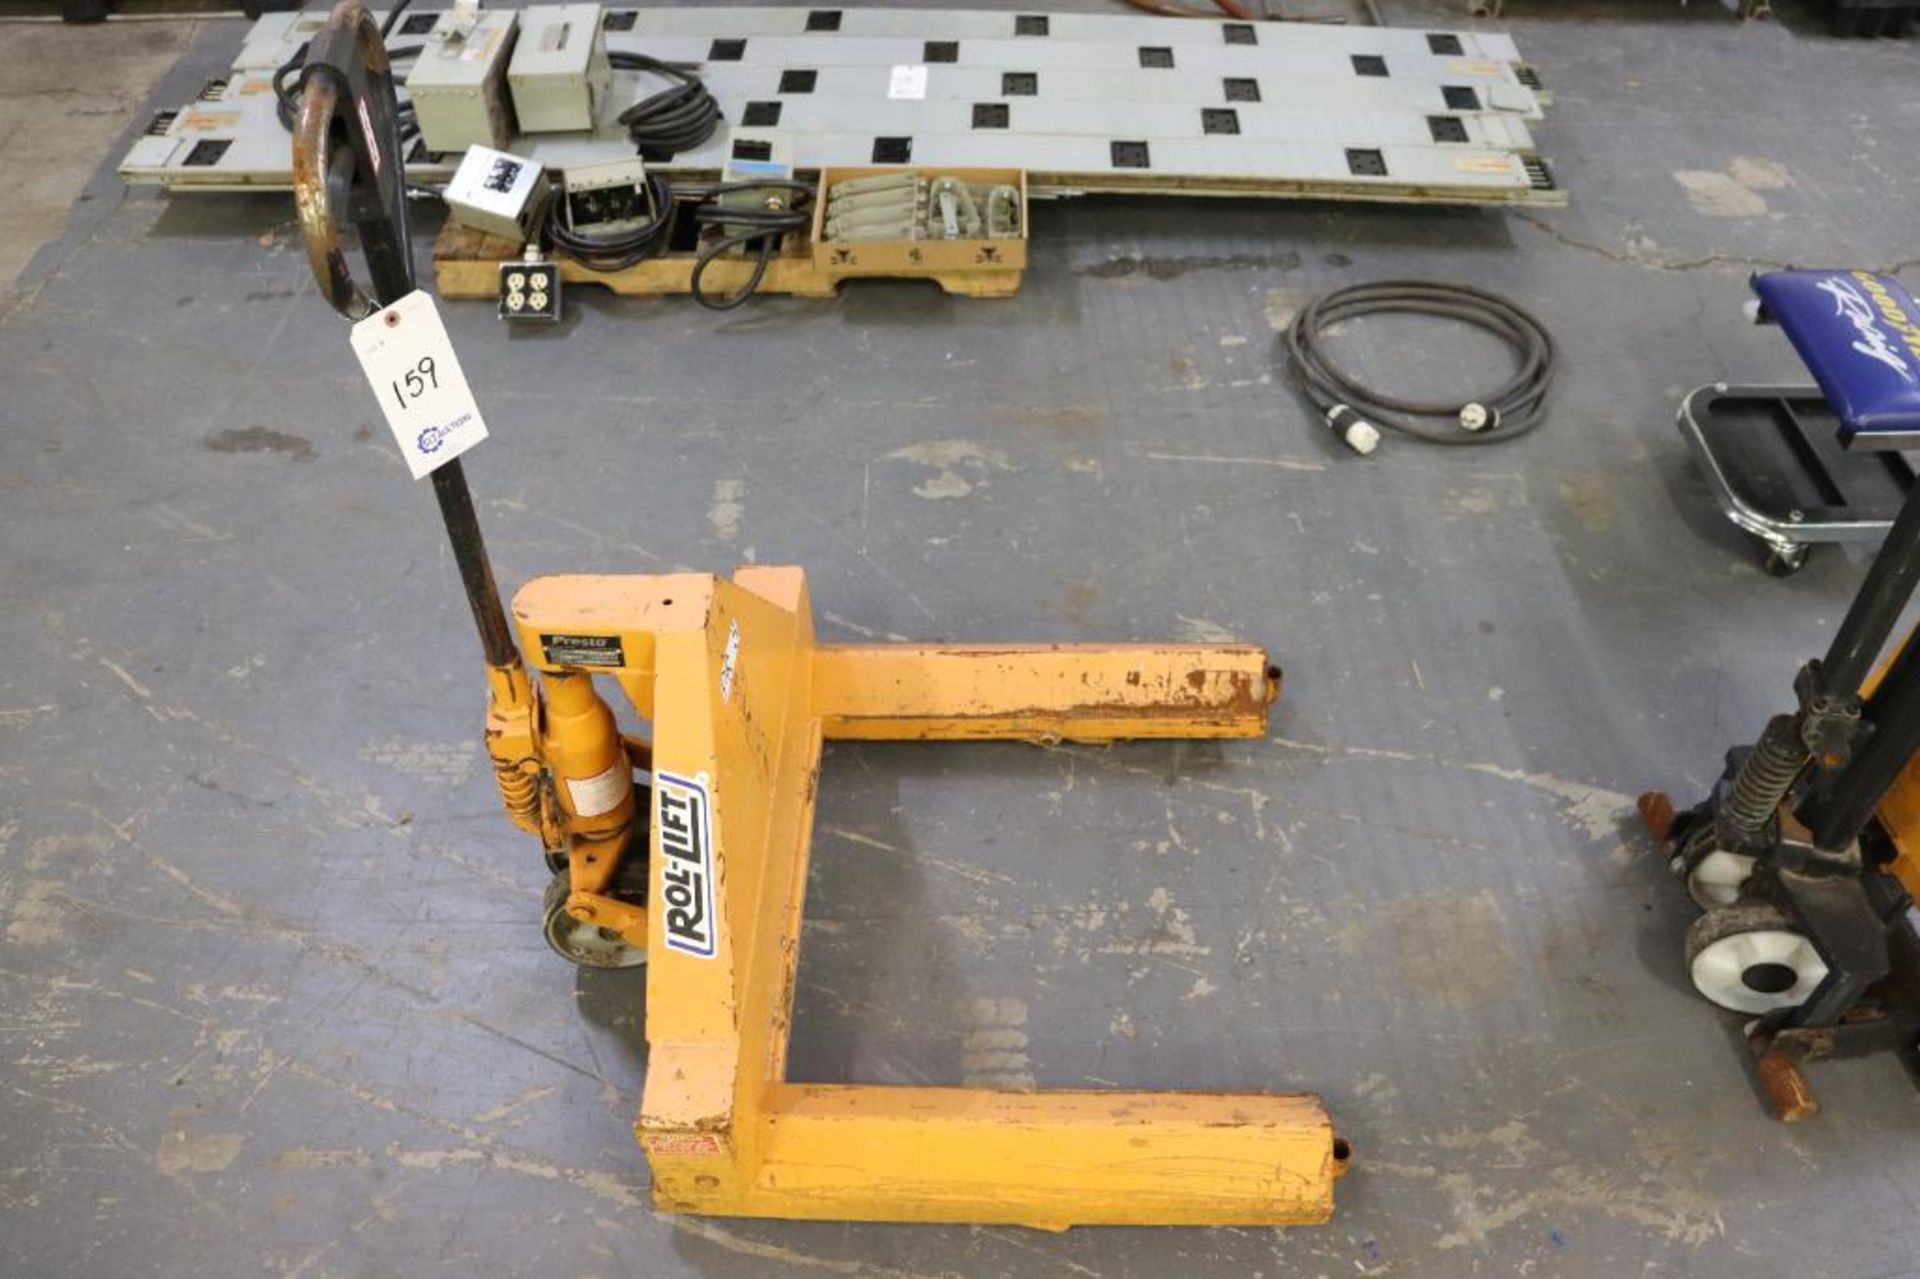 Presto 5500lbs roll moving pallet jack - Image 2 of 8